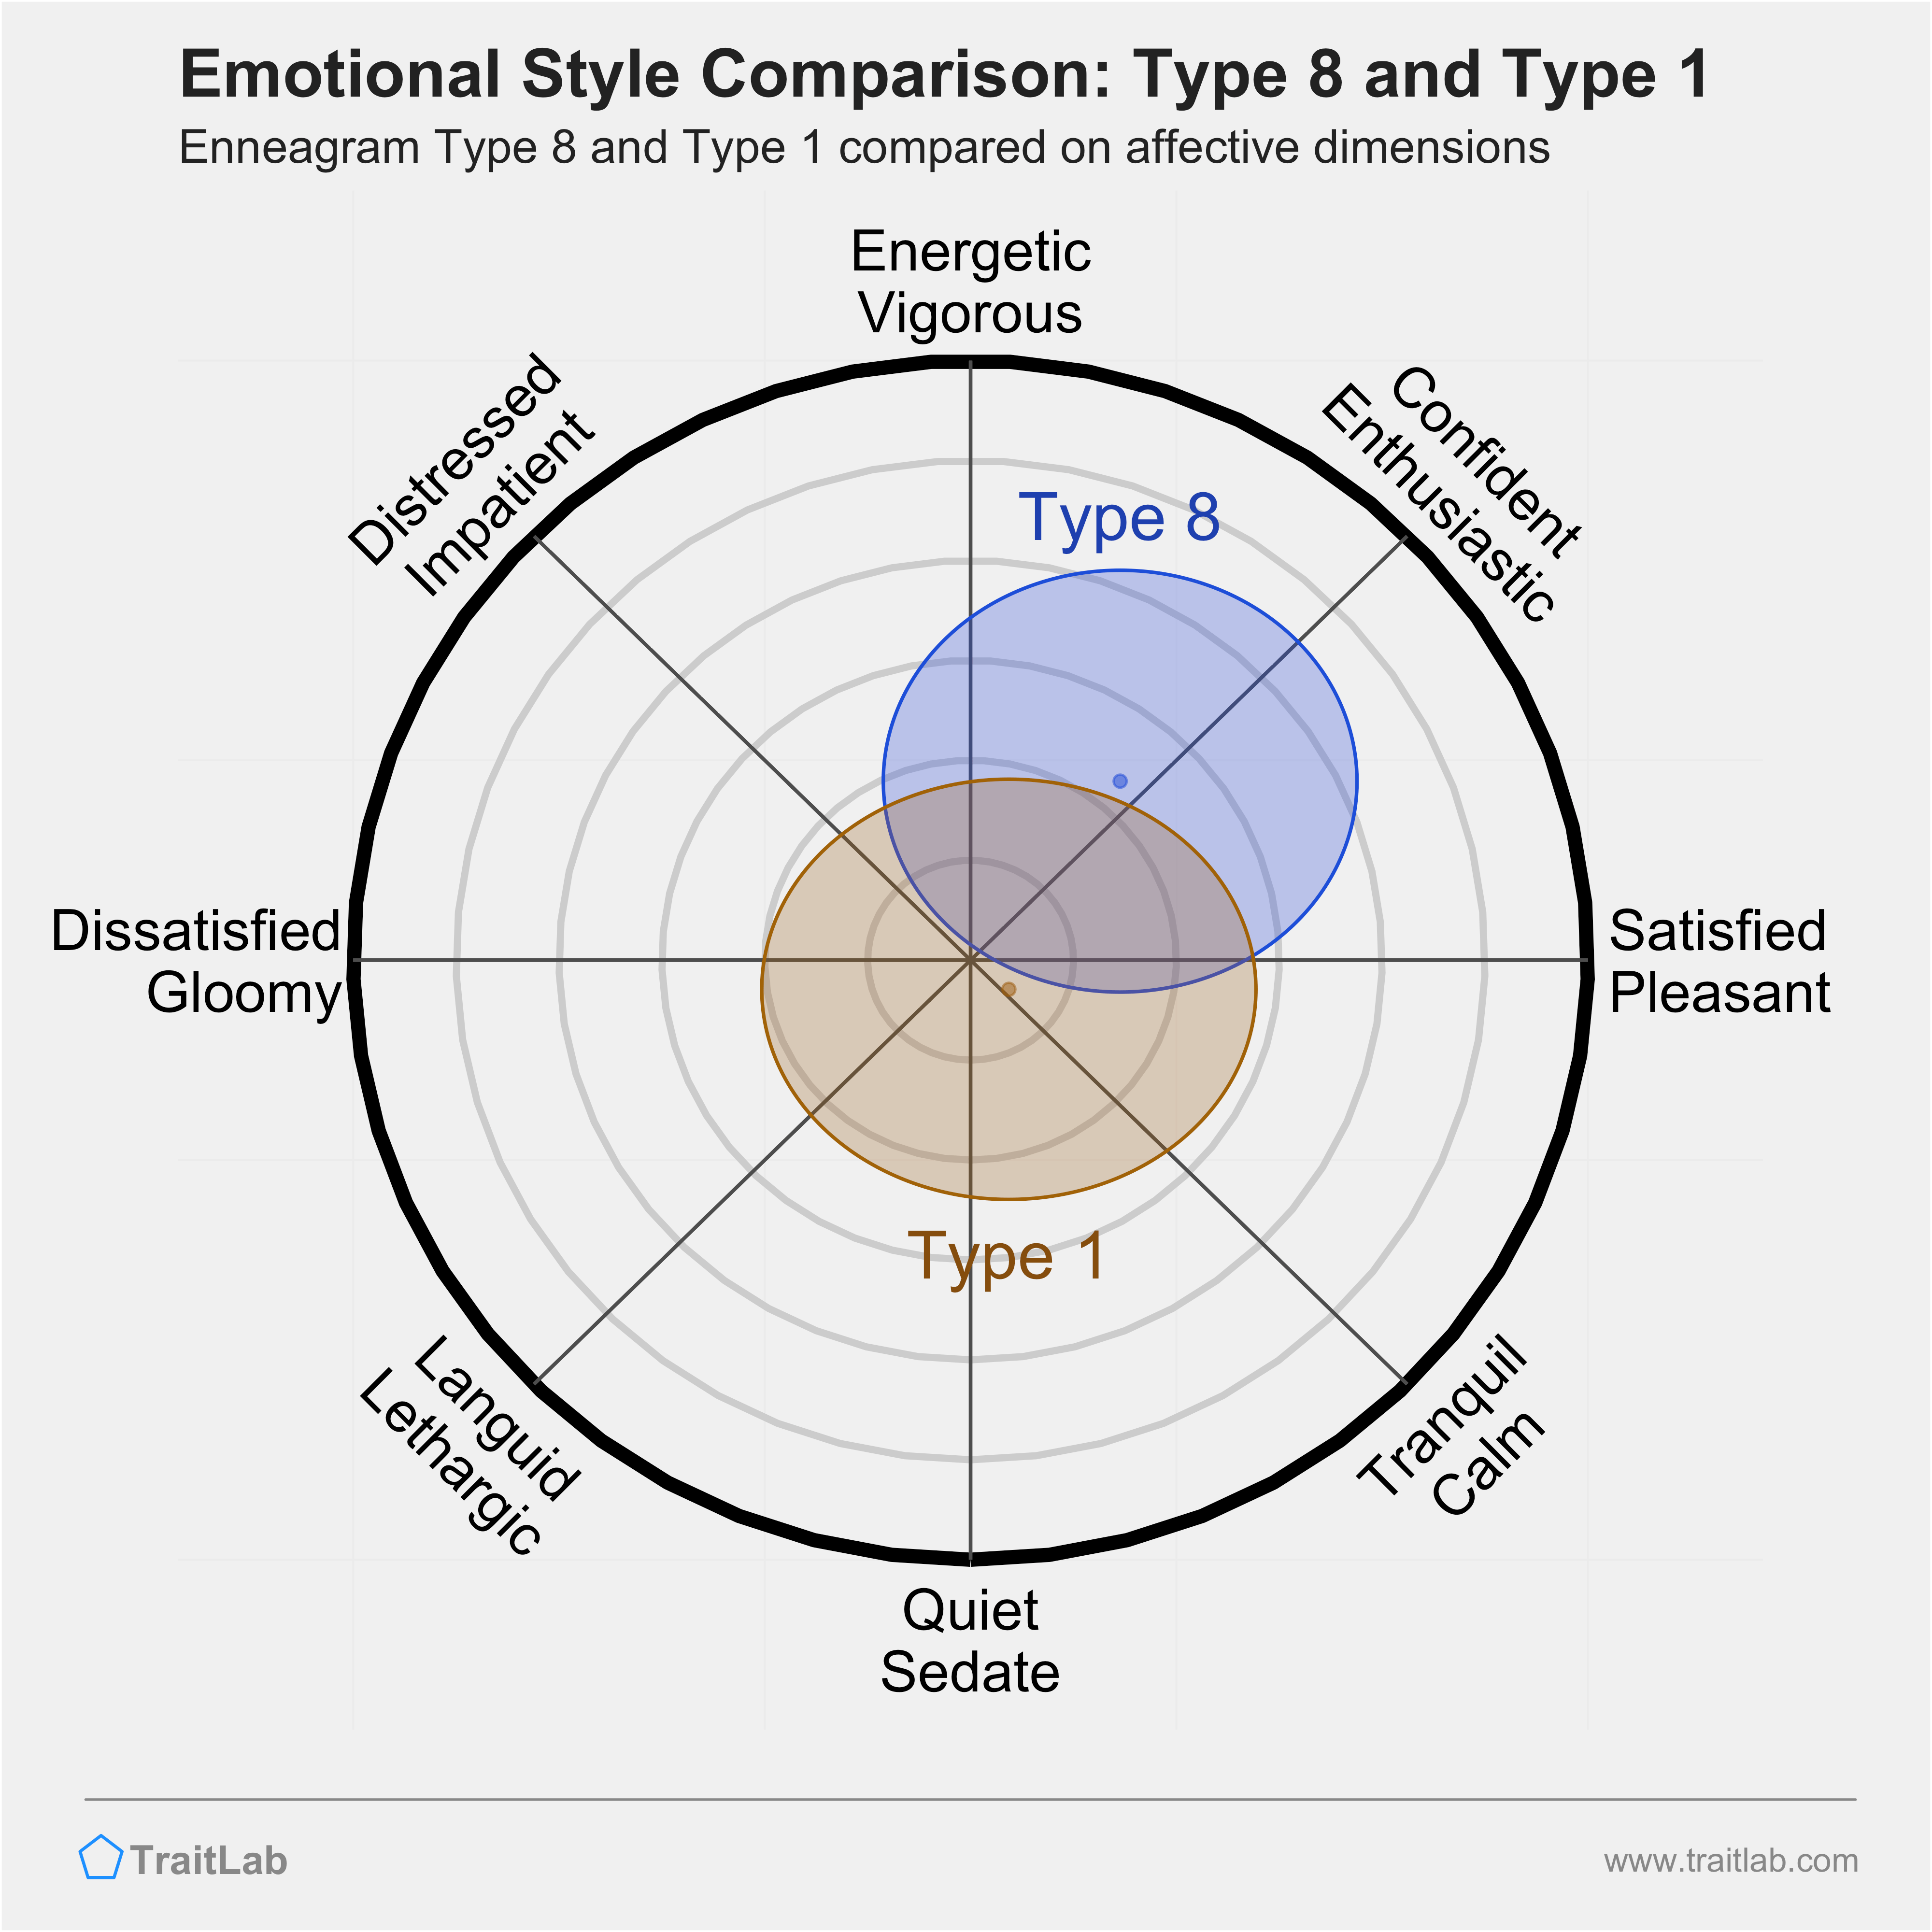 Type 8 and Type 1 comparison across emotional (affective) dimensions